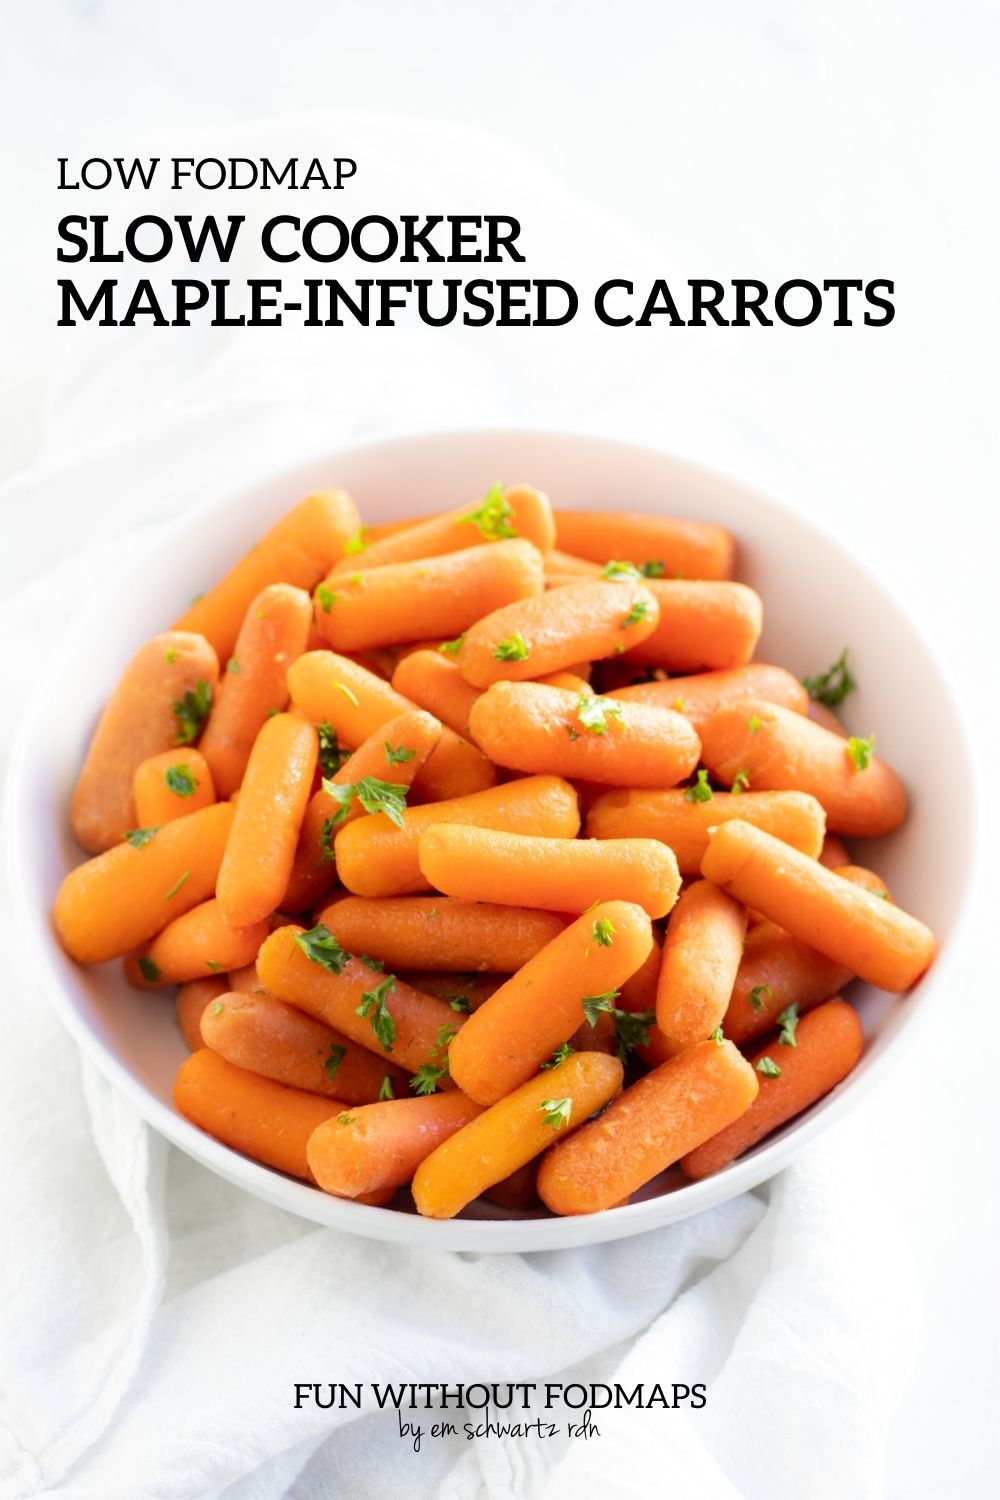 A bowl of cooked carrots topped with fresh parsley. In the white space above the bowl, black text reads "Low FODMAP Slow Cooker Maple-Infused Carrots."